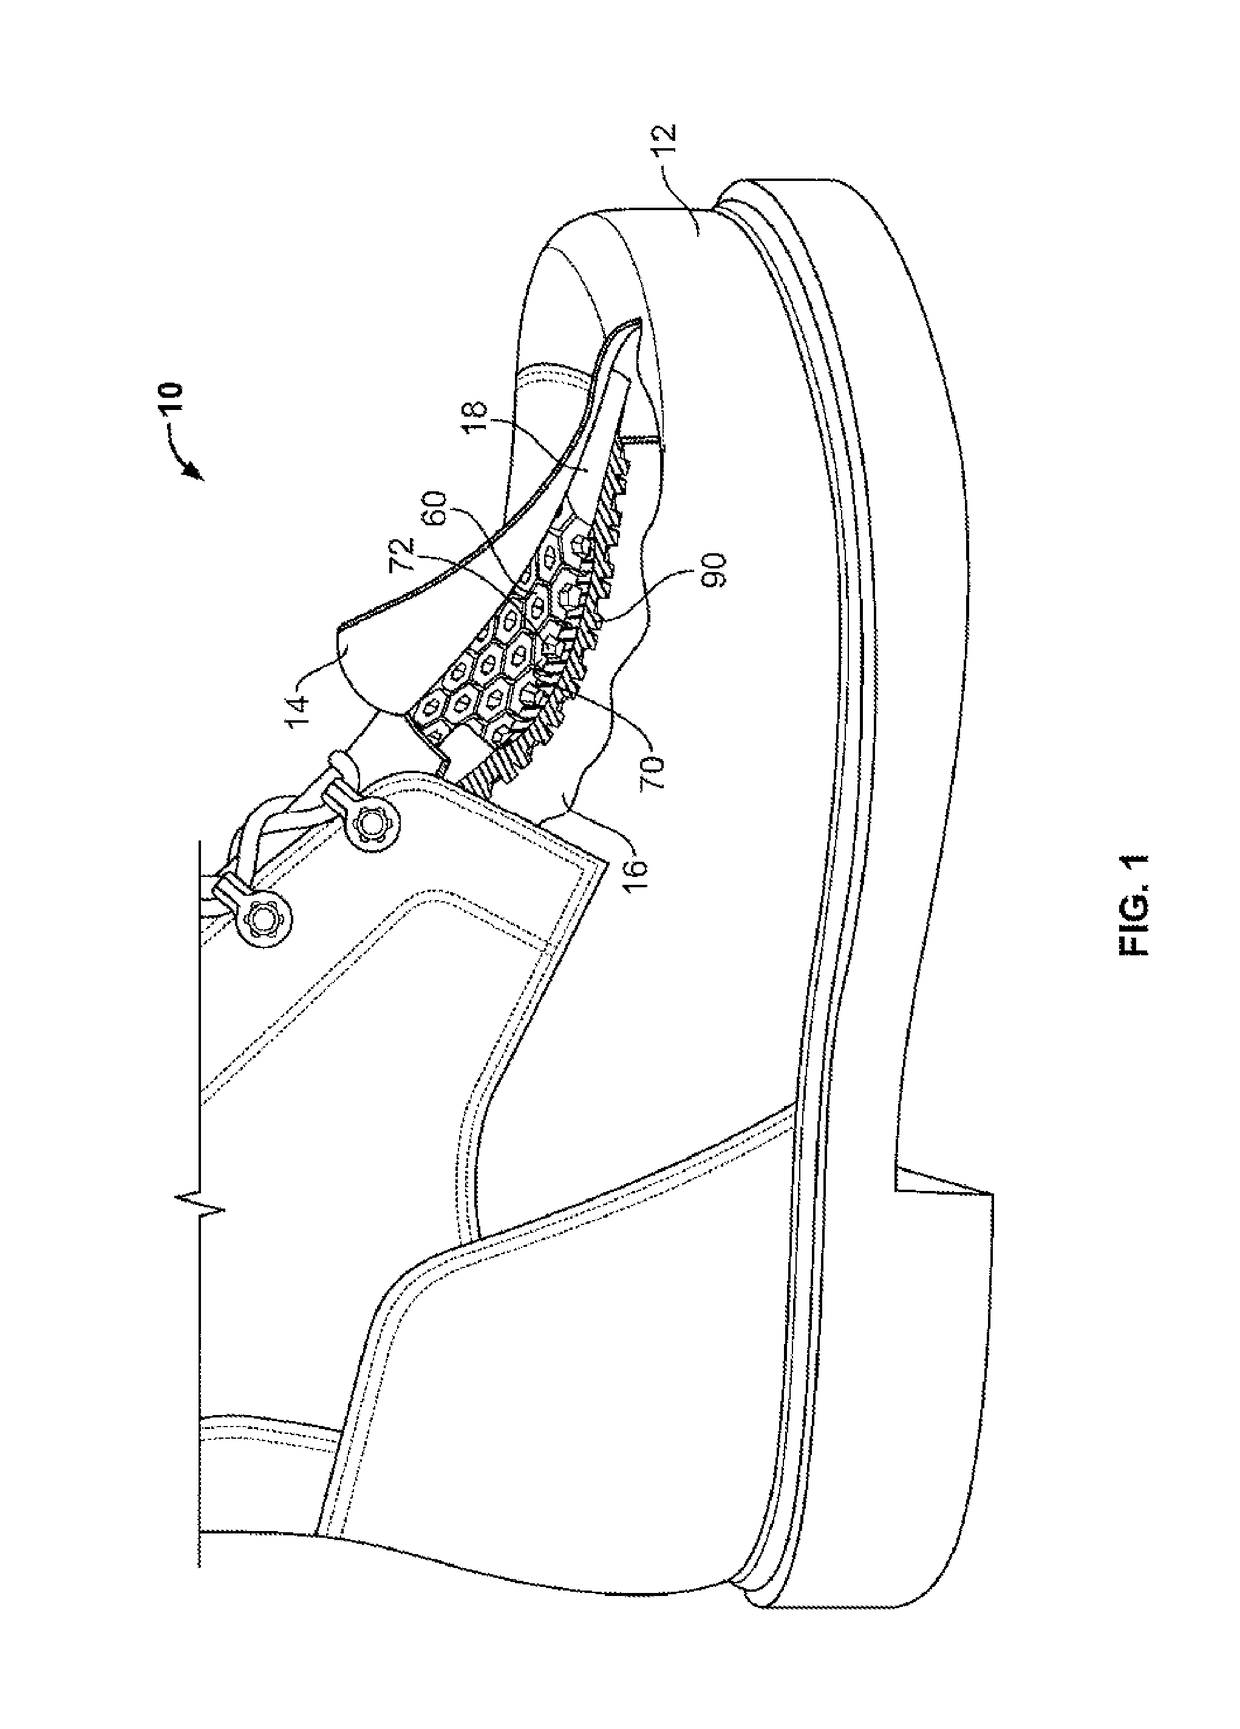 Protection devices for use in shoes or other products